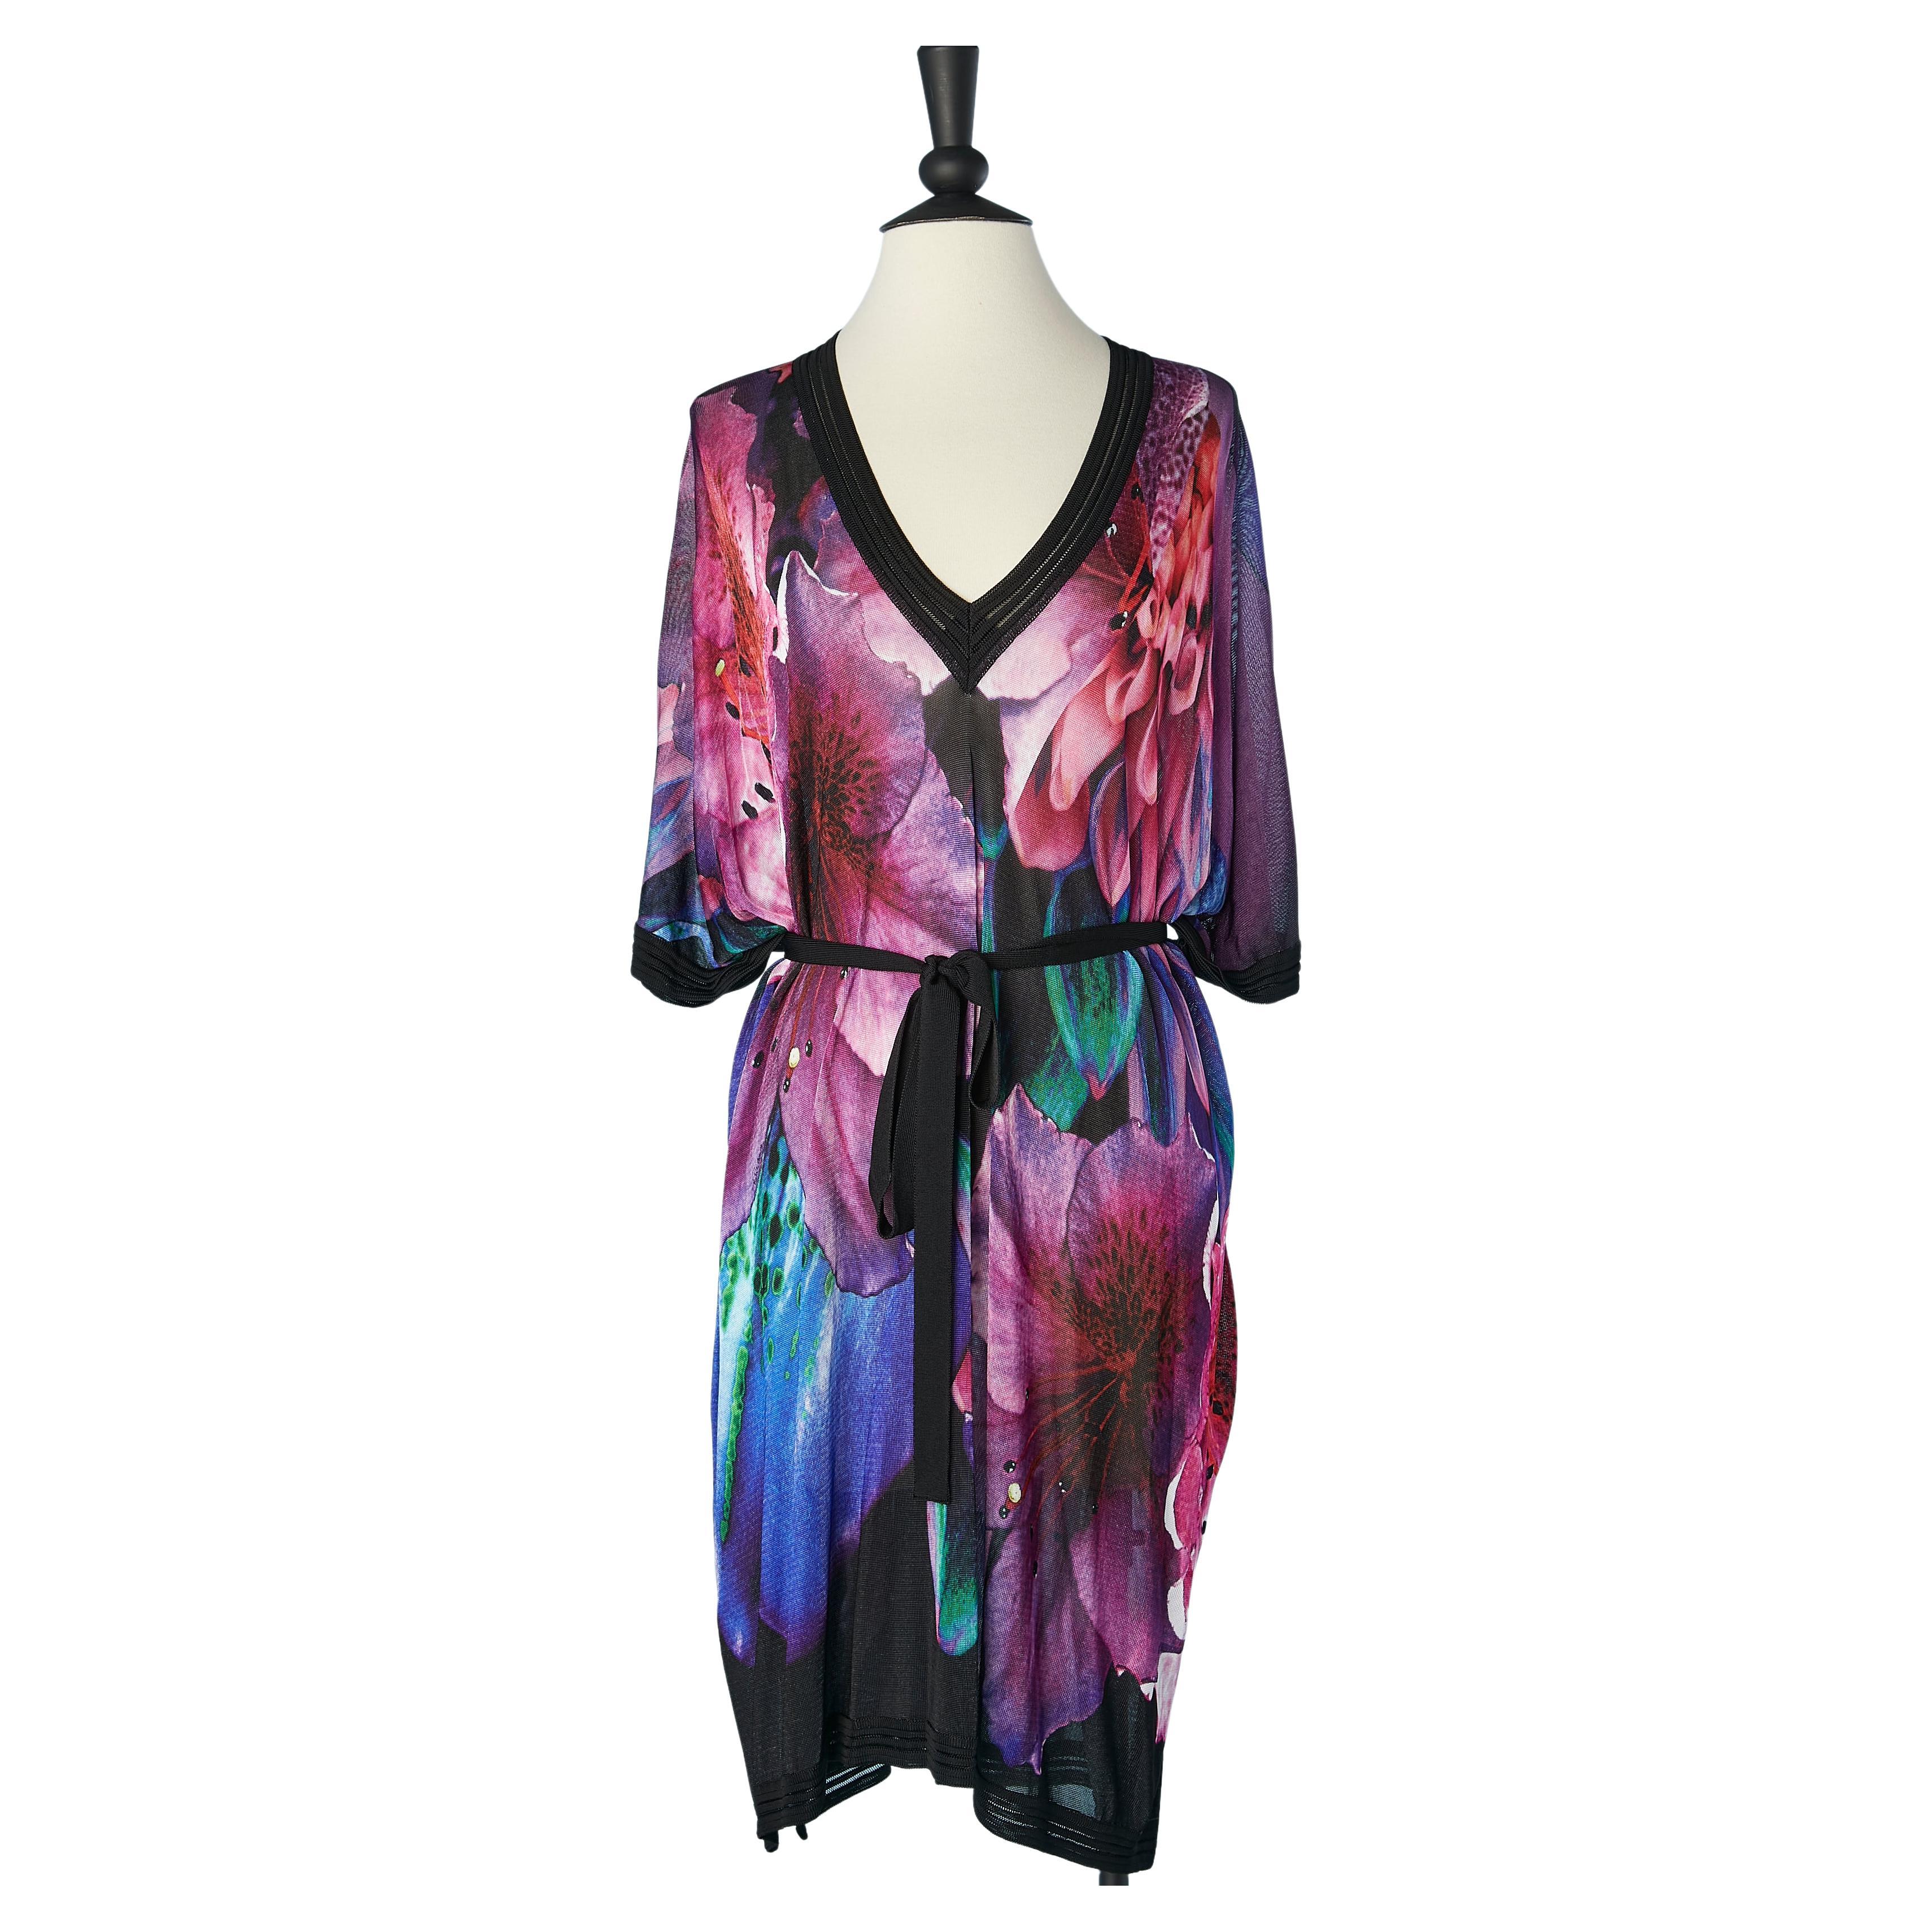 Oversize rayon knit printed flower dress with rayon belt Roberto CAVALLI  For Sale